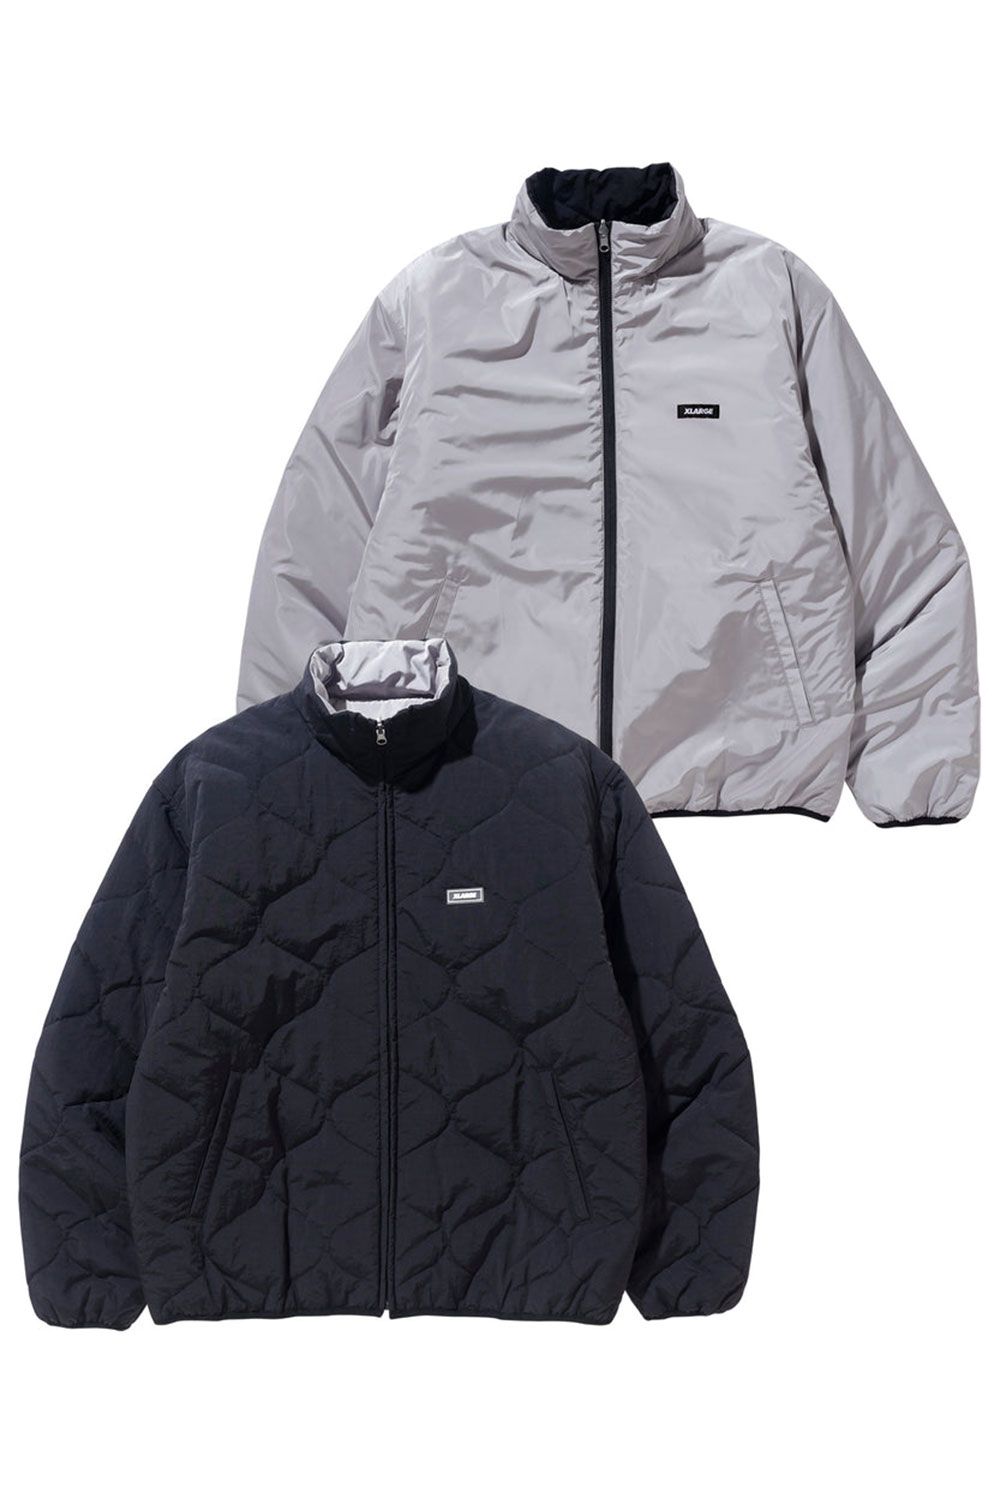 XLARGE - REVERSIBLE QUILTED JACKET / ネイビー | Tempt